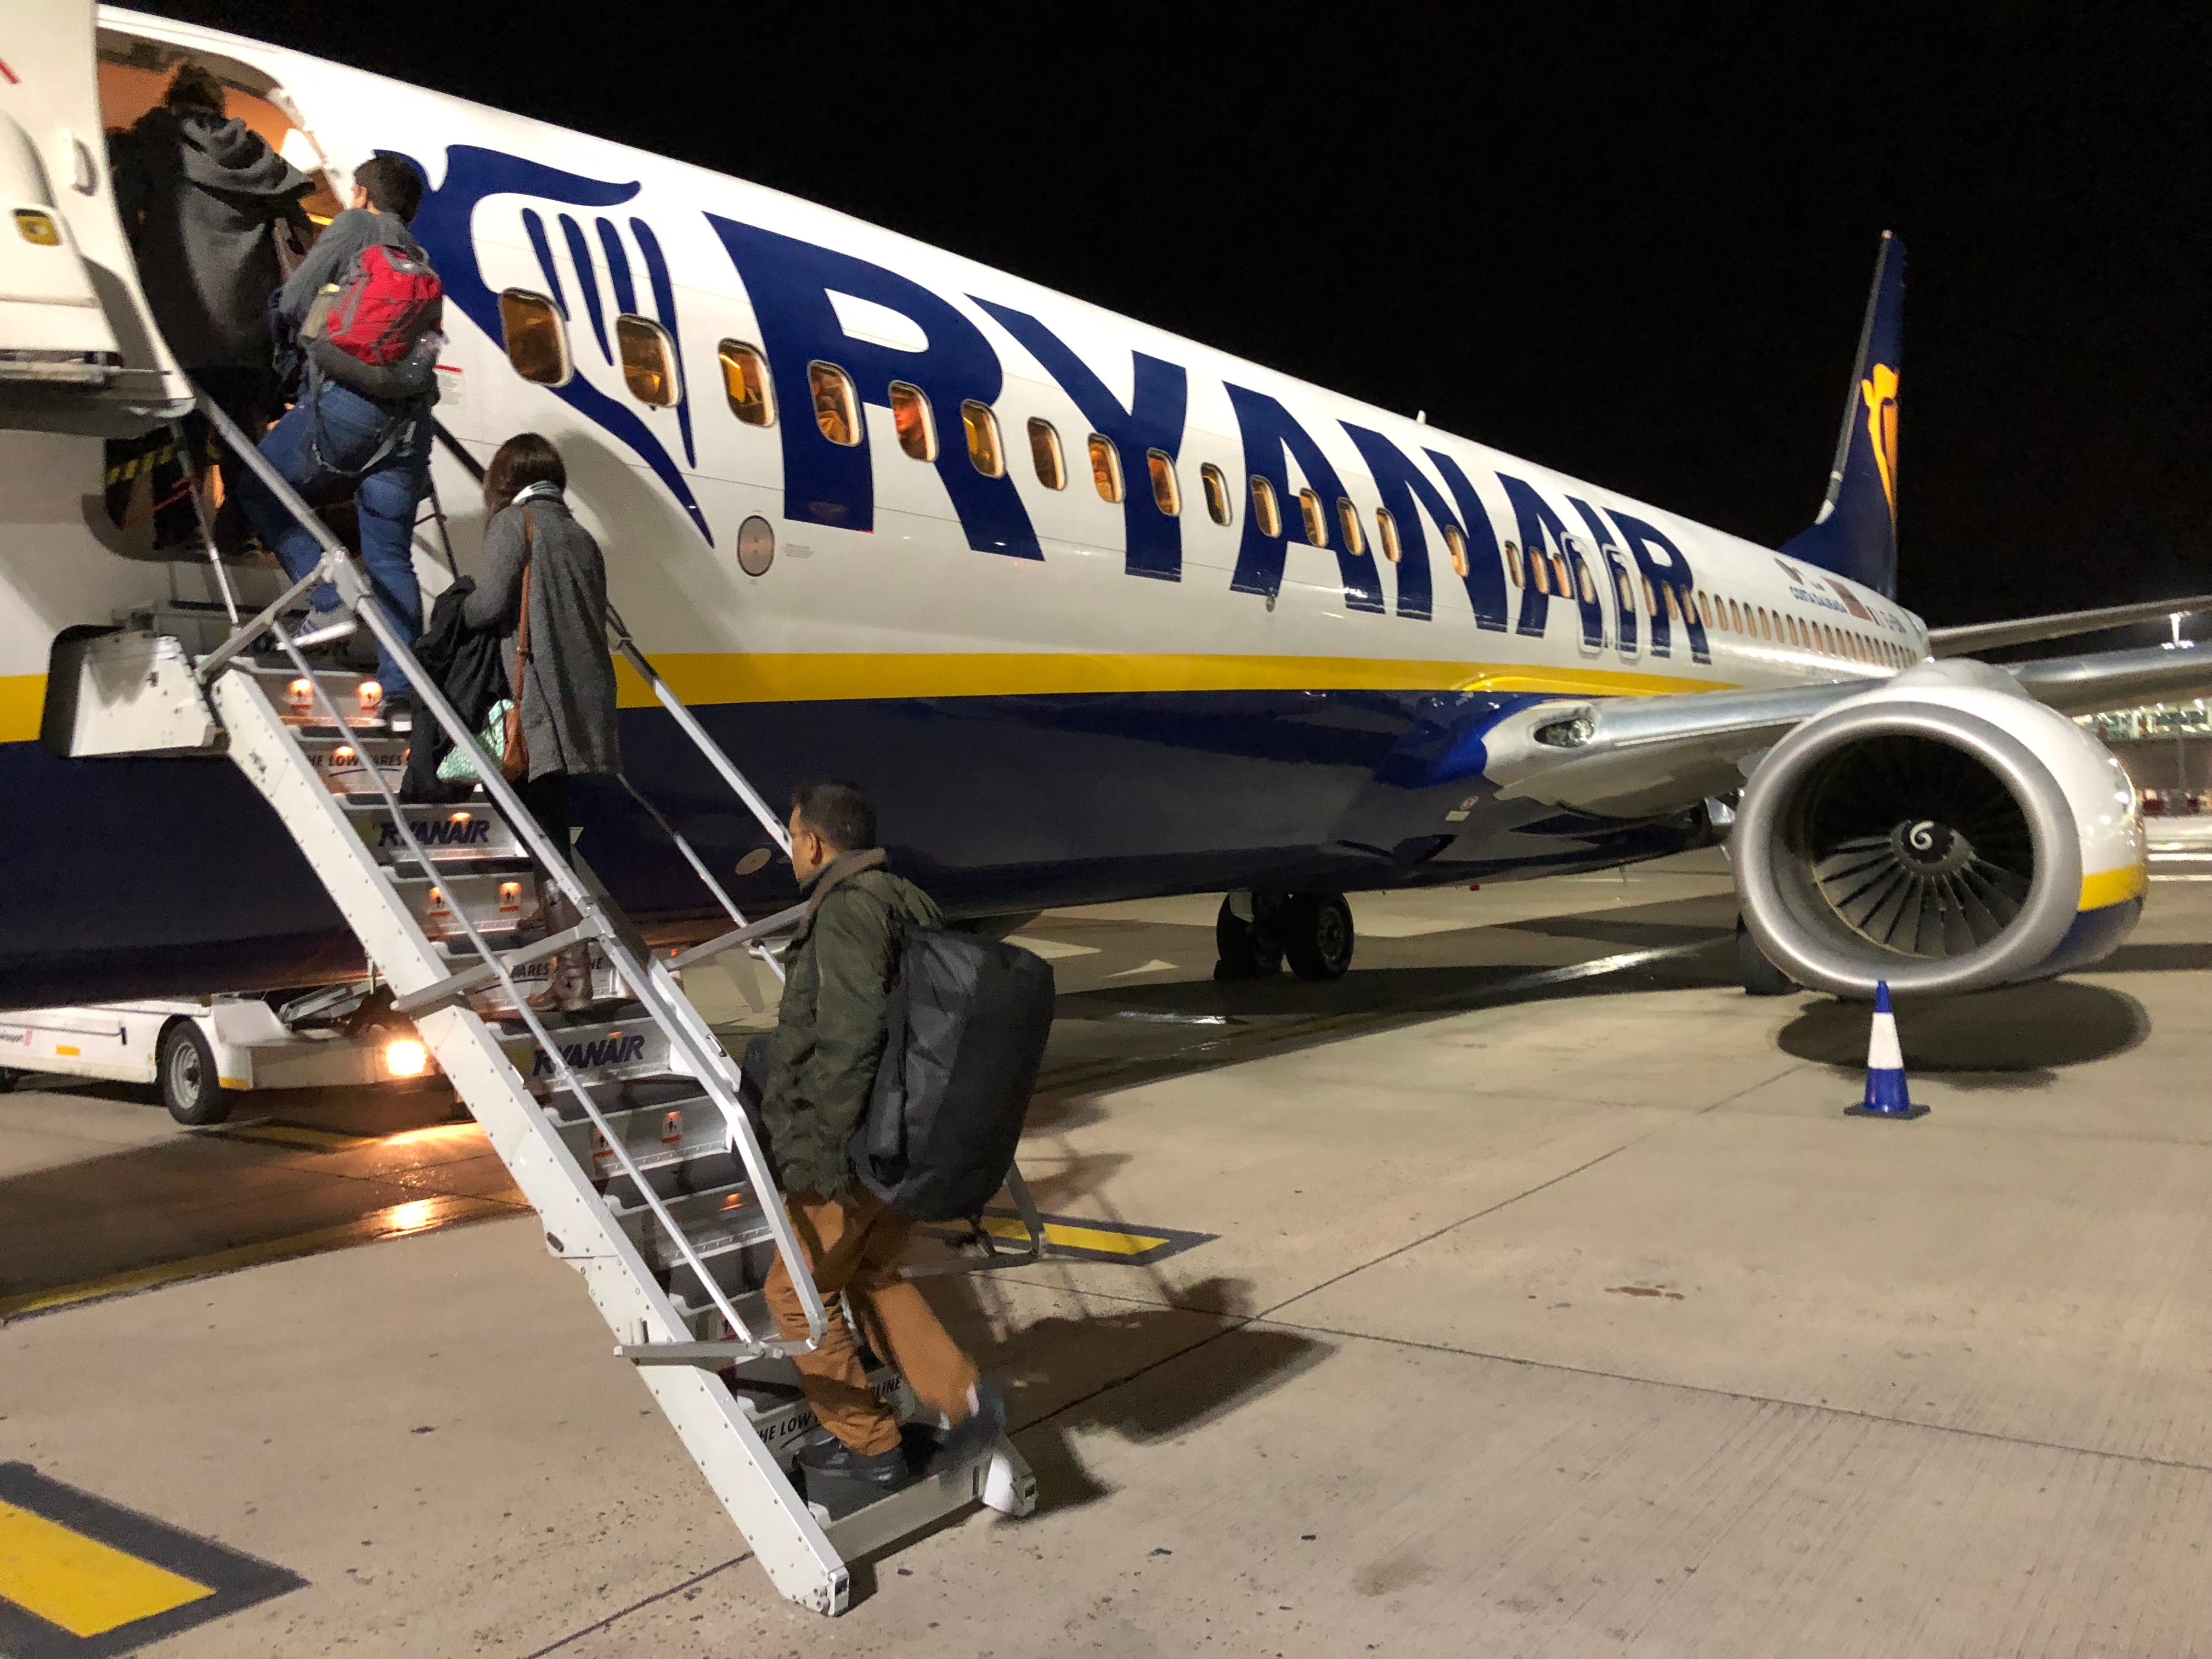 <p>Not jabbing and going: a Ryanair flight</p>